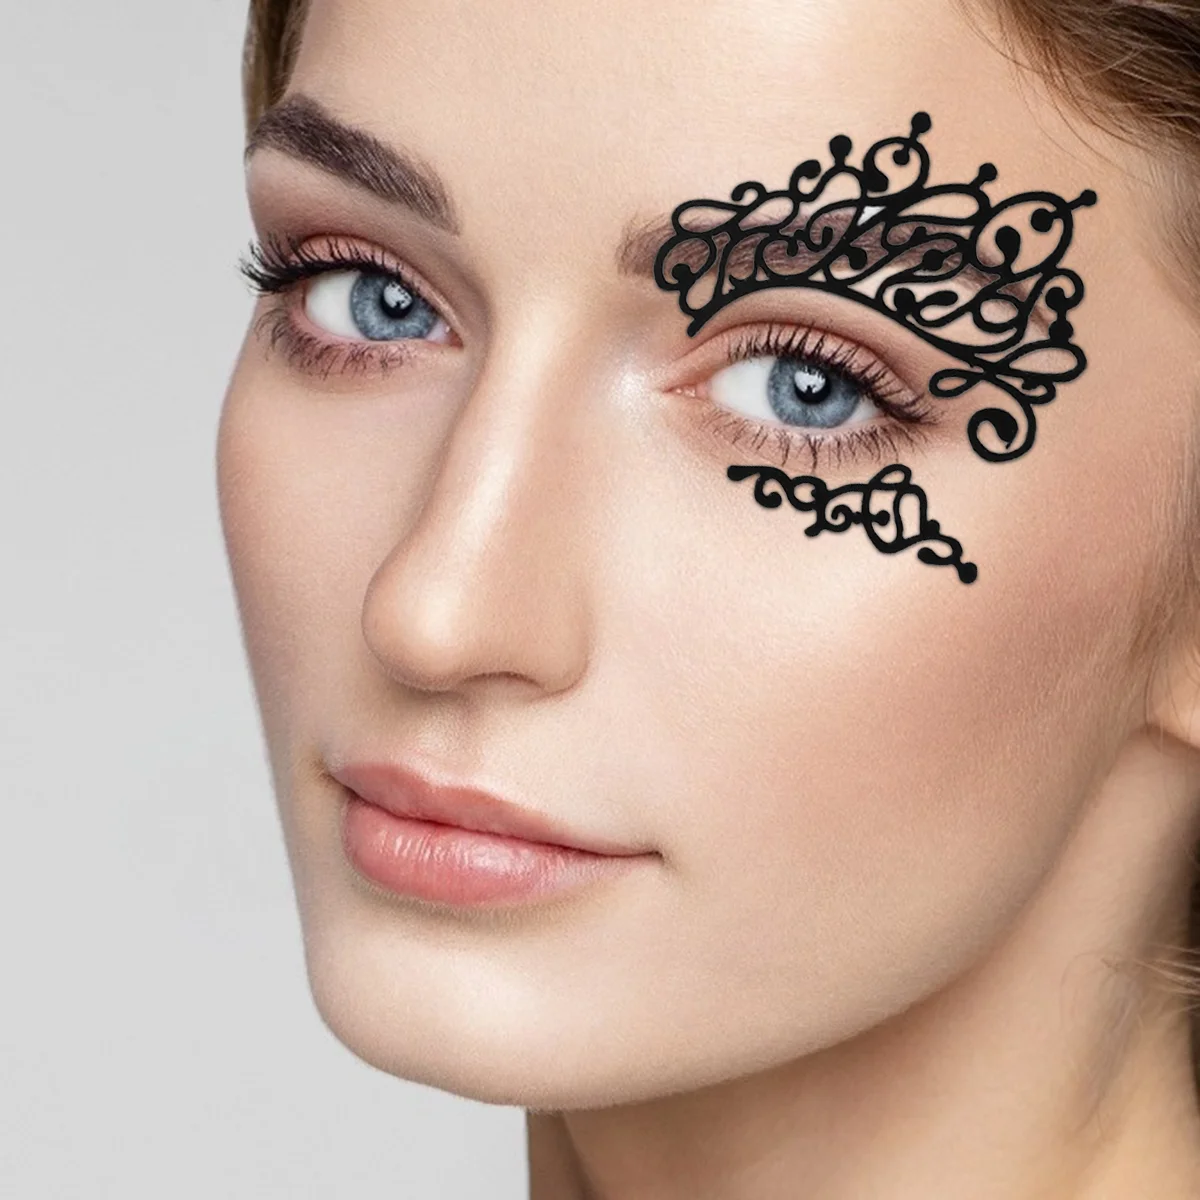 

3 Pairs Lace Eyeliner Stickers Temporary Tattoos Flash Eyeshadow Paper Makeup Decals